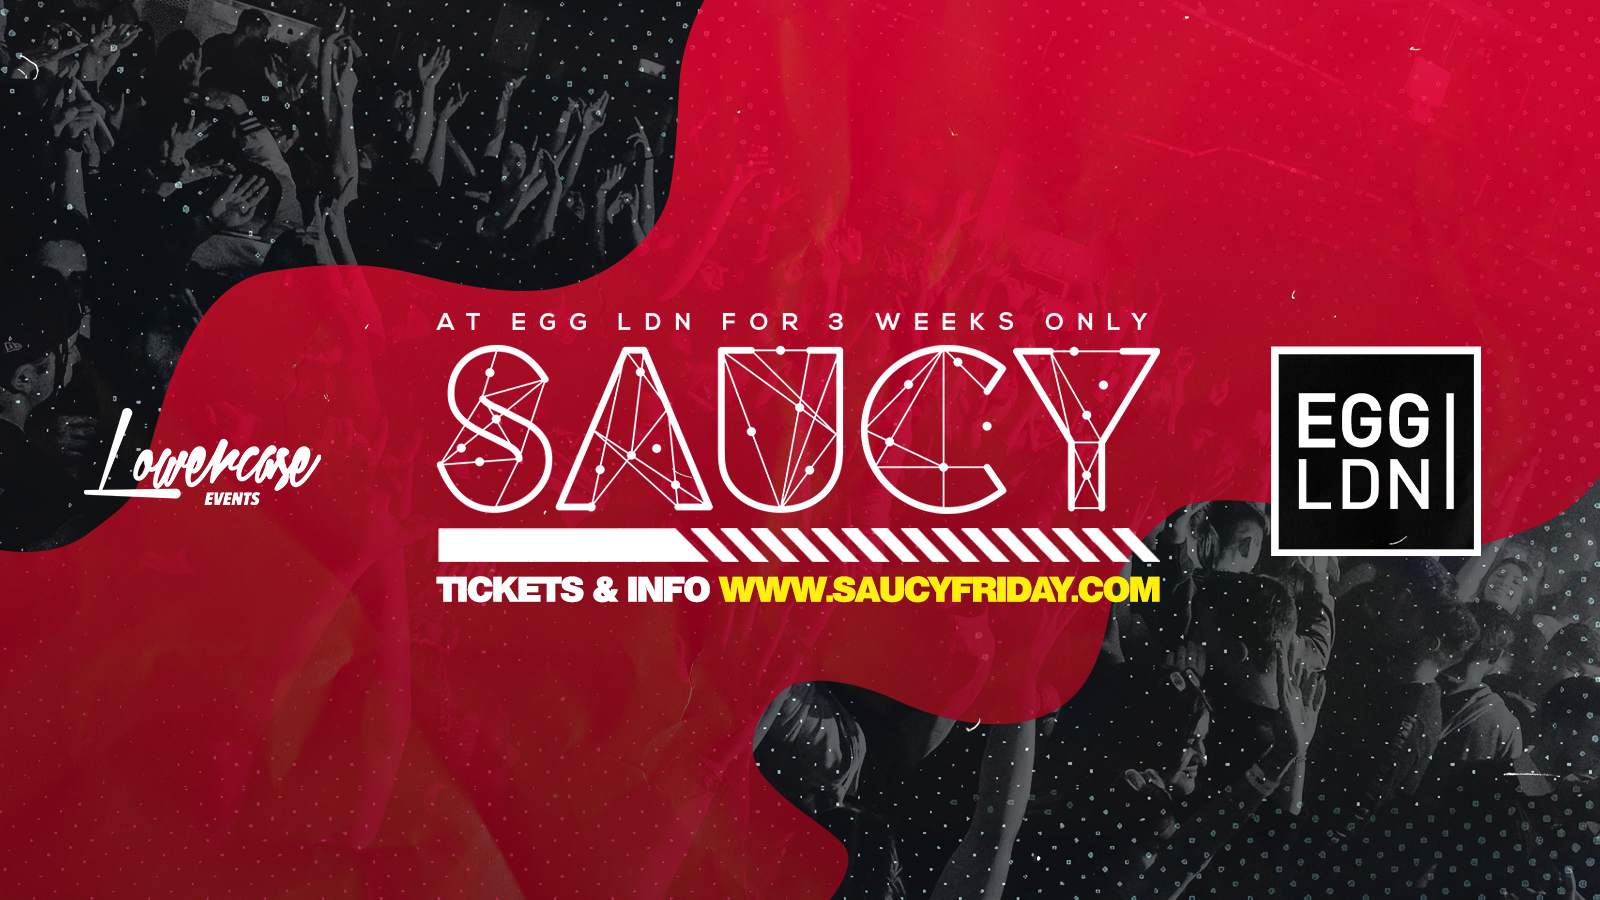 Saucy Fridays - London's Biggest Weekly Student Friday - Página frontal